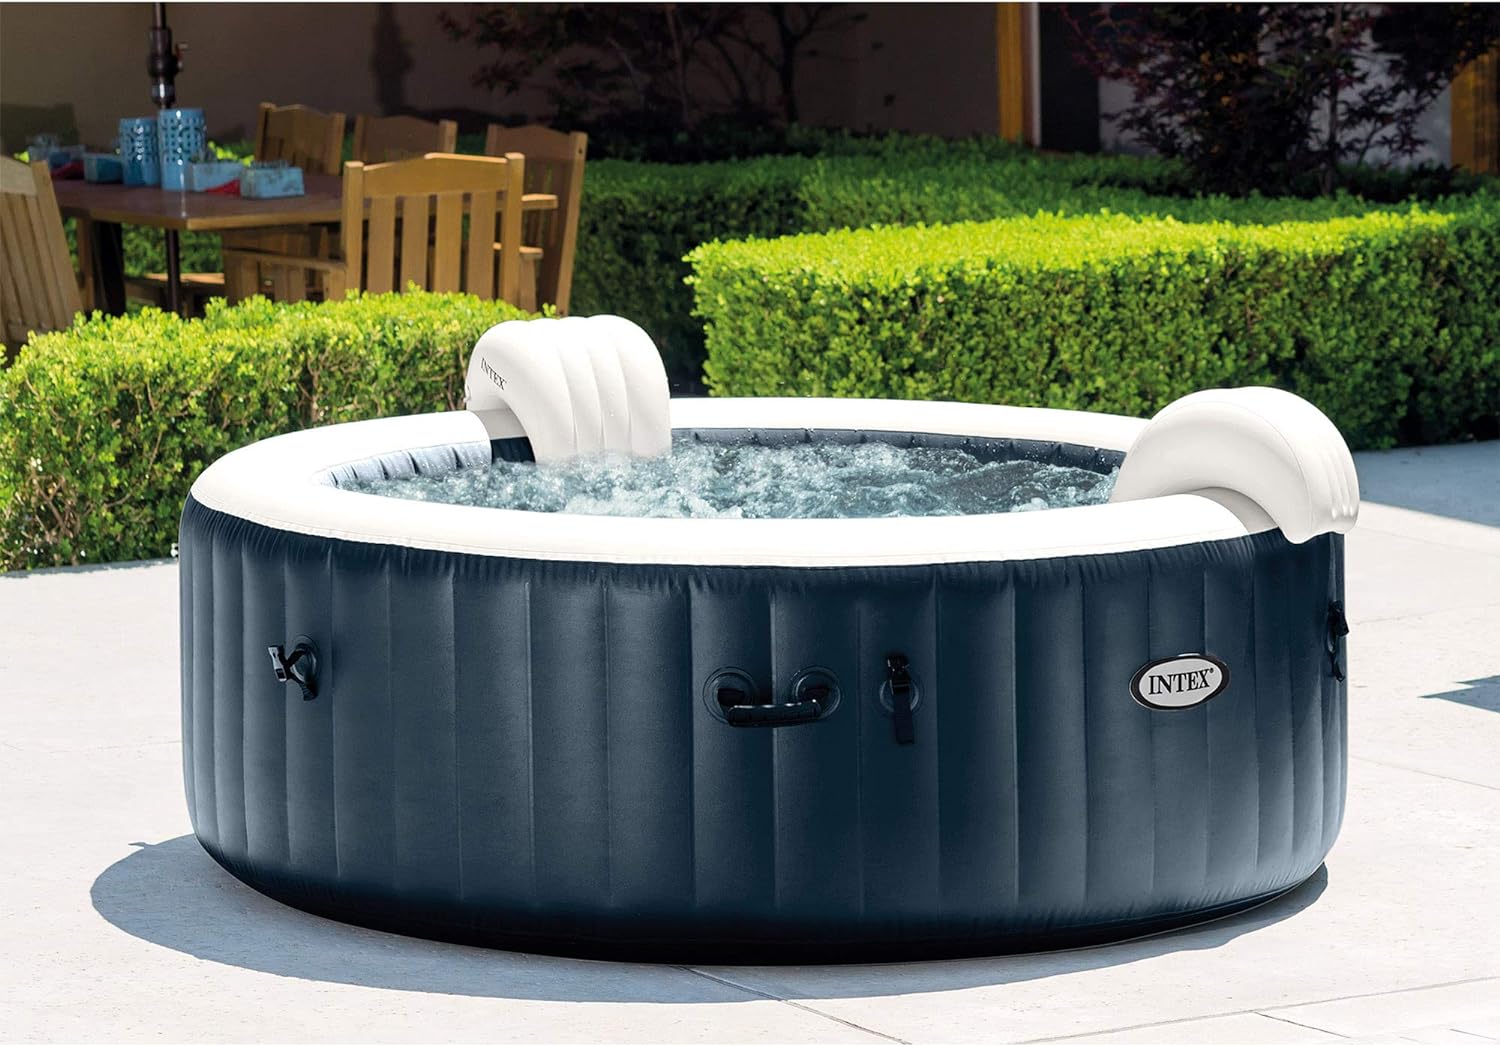 How To Heat Up An Inflatable Hot Tub Faster 1703730425 